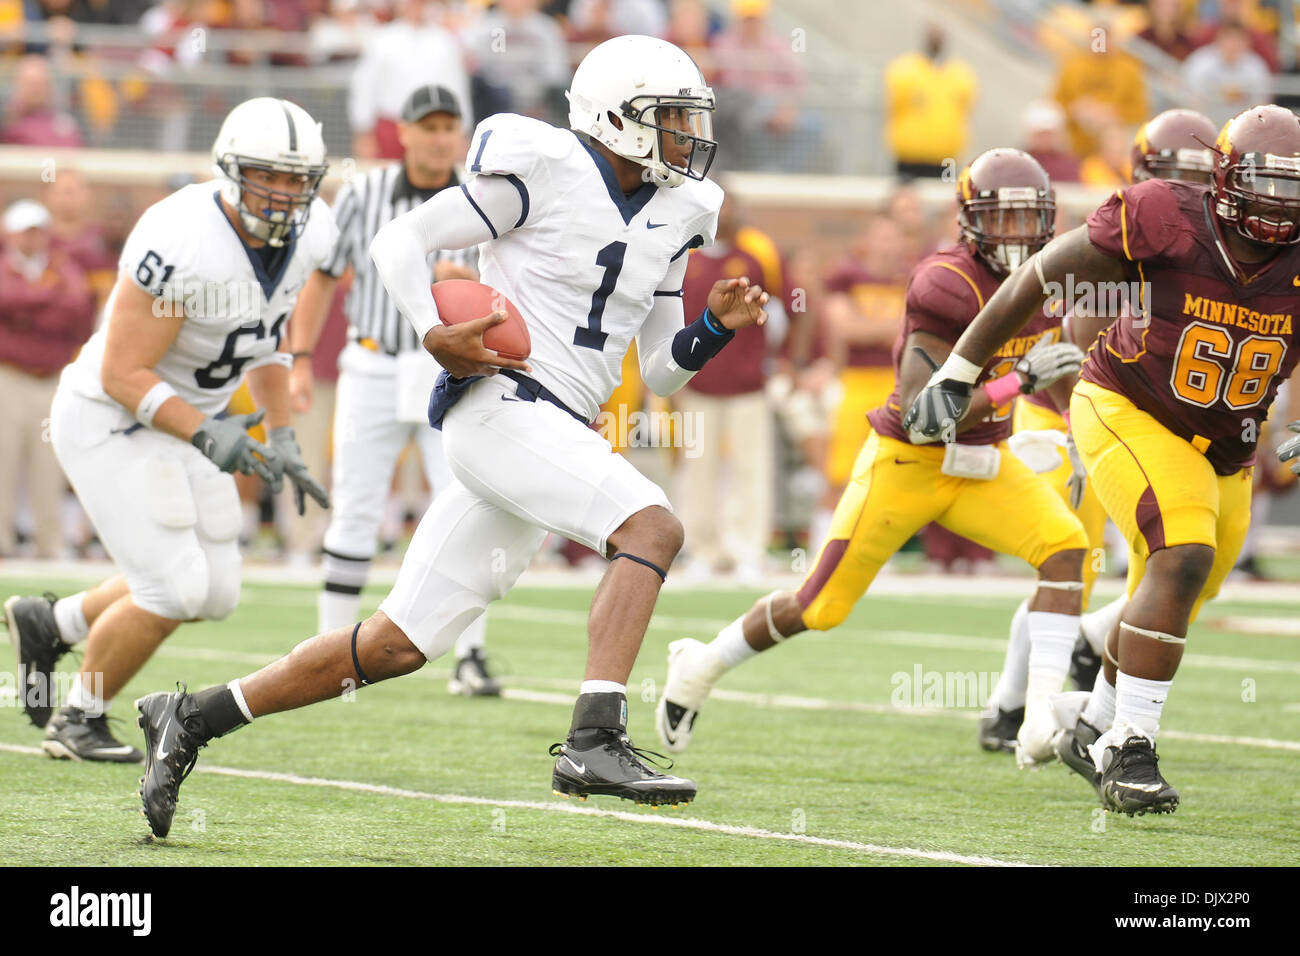 Oct. 22, 2010 - Minneapolis, Minnesota, United States of America - Penn State University quarterback Rob Bolden in game action during  the game between the Minnesota Gophers and the Penn State Nittany Lions at the TCF Stadium in Minneapolis, Minnesota.  Penn State defeats  Minnesota 33-21. (Credit Image: © Marilyn Indahl/Southcreek Global/ZUMApress.com) Stock Photo